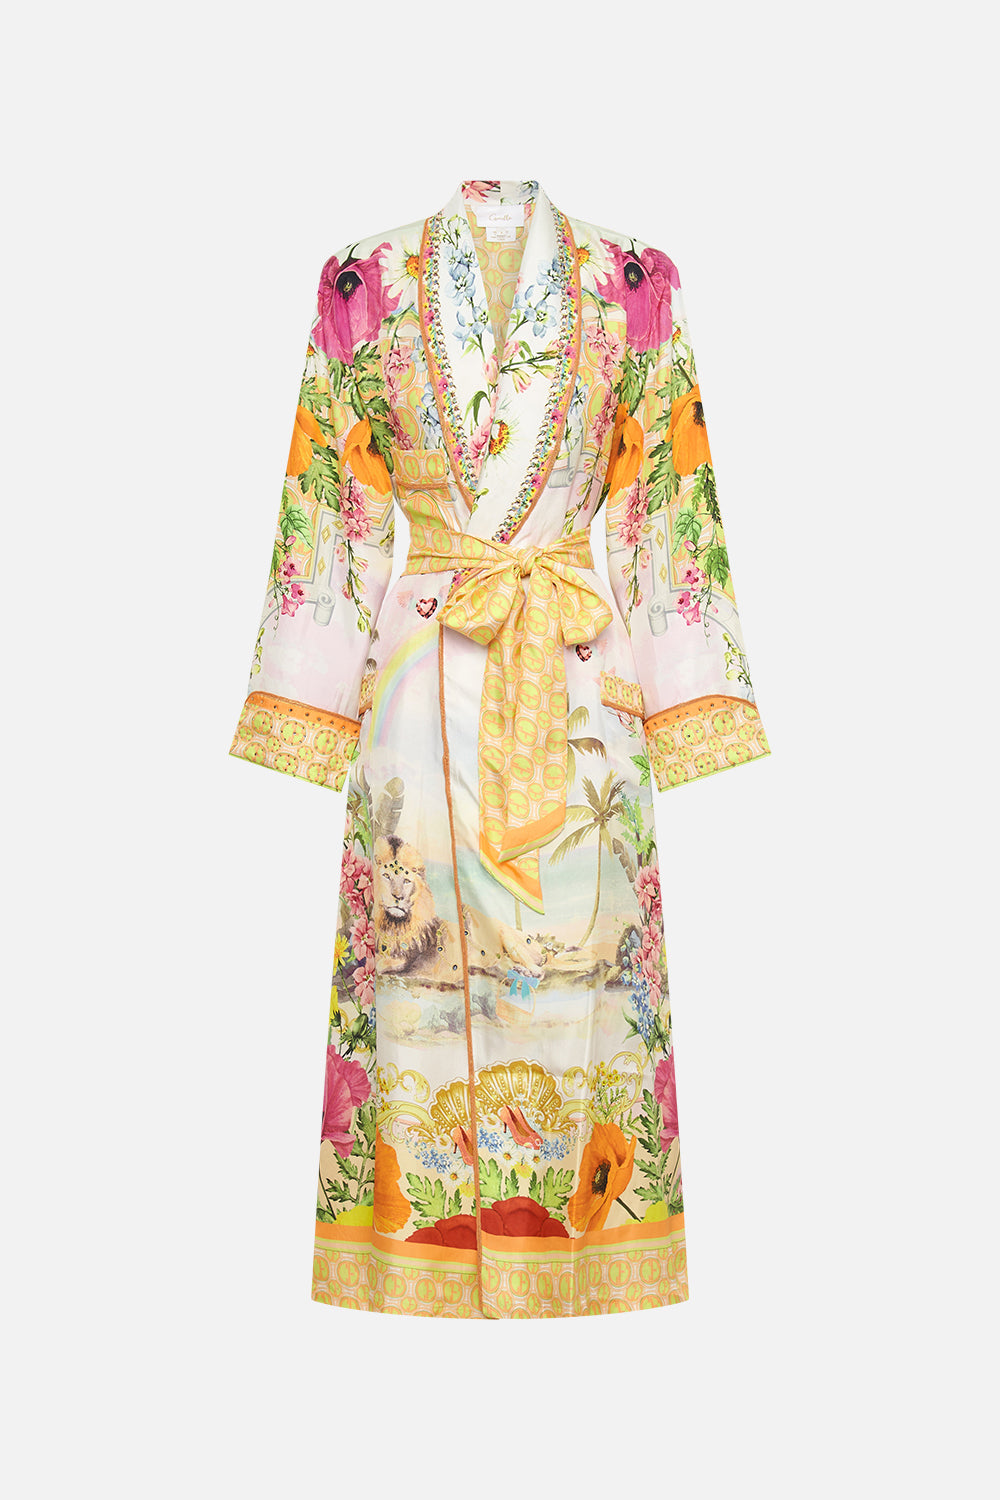 LONG ROBE WITH TIE SUNLIGHT SYMPHONY